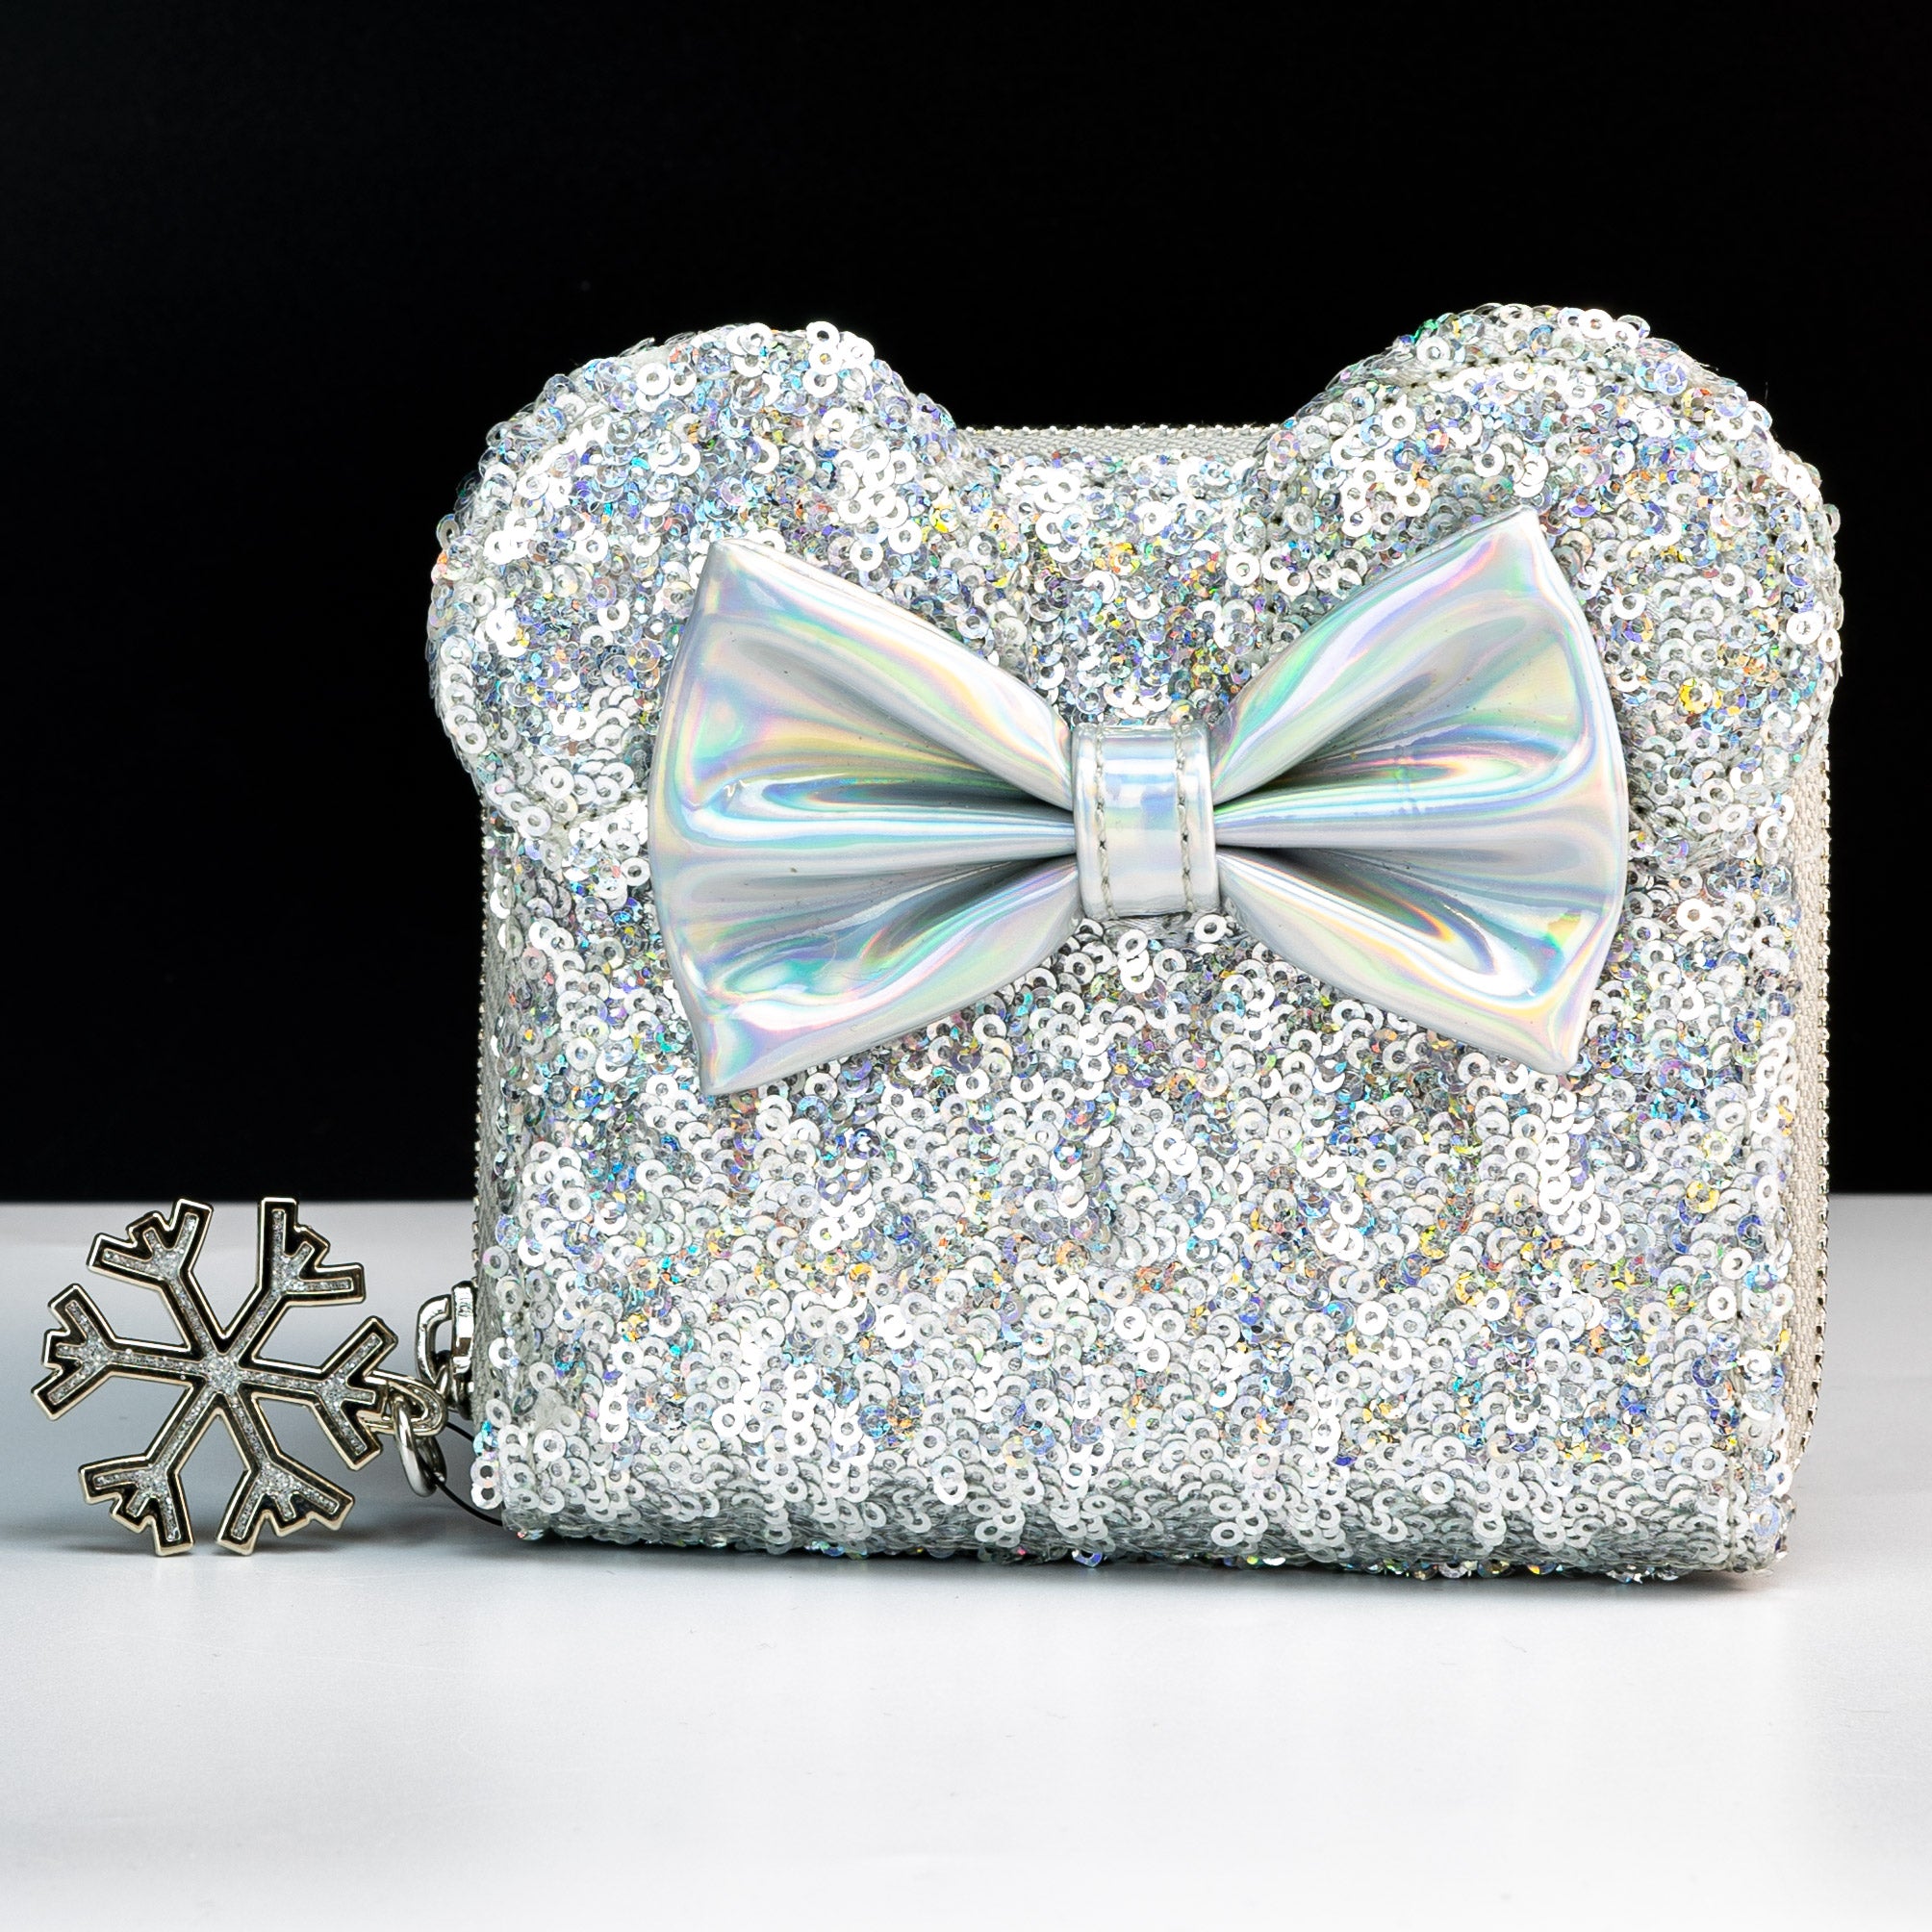 Loungefly x Disney Minnie Mouse Holographic Sequin Purse